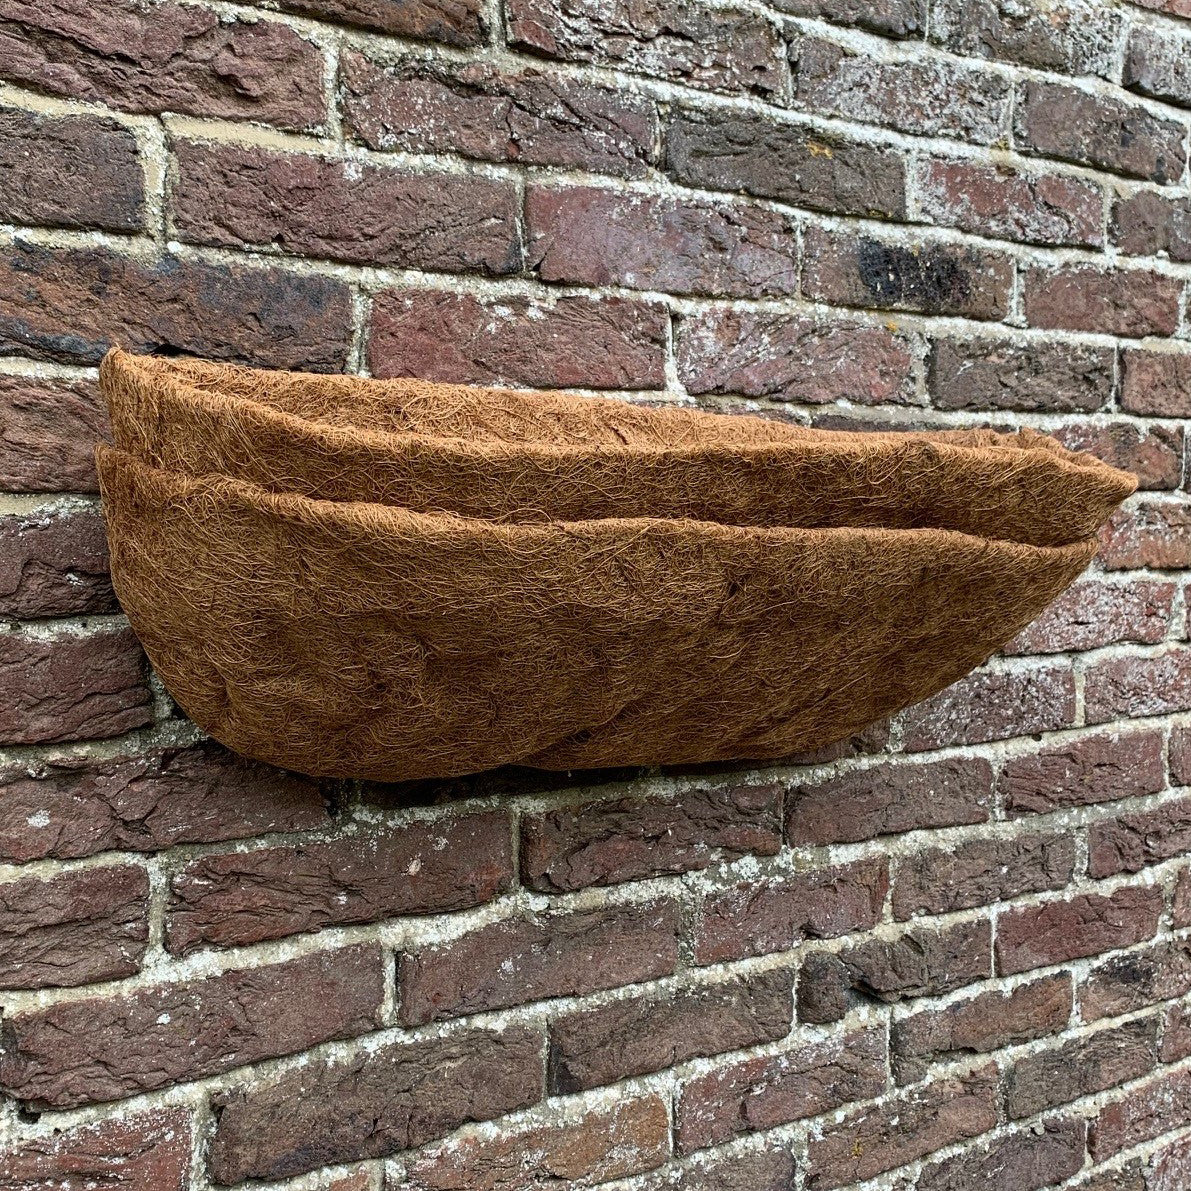 Pack of 2 Extra Deep Coco Wall Trough Planter Liner (60cm)